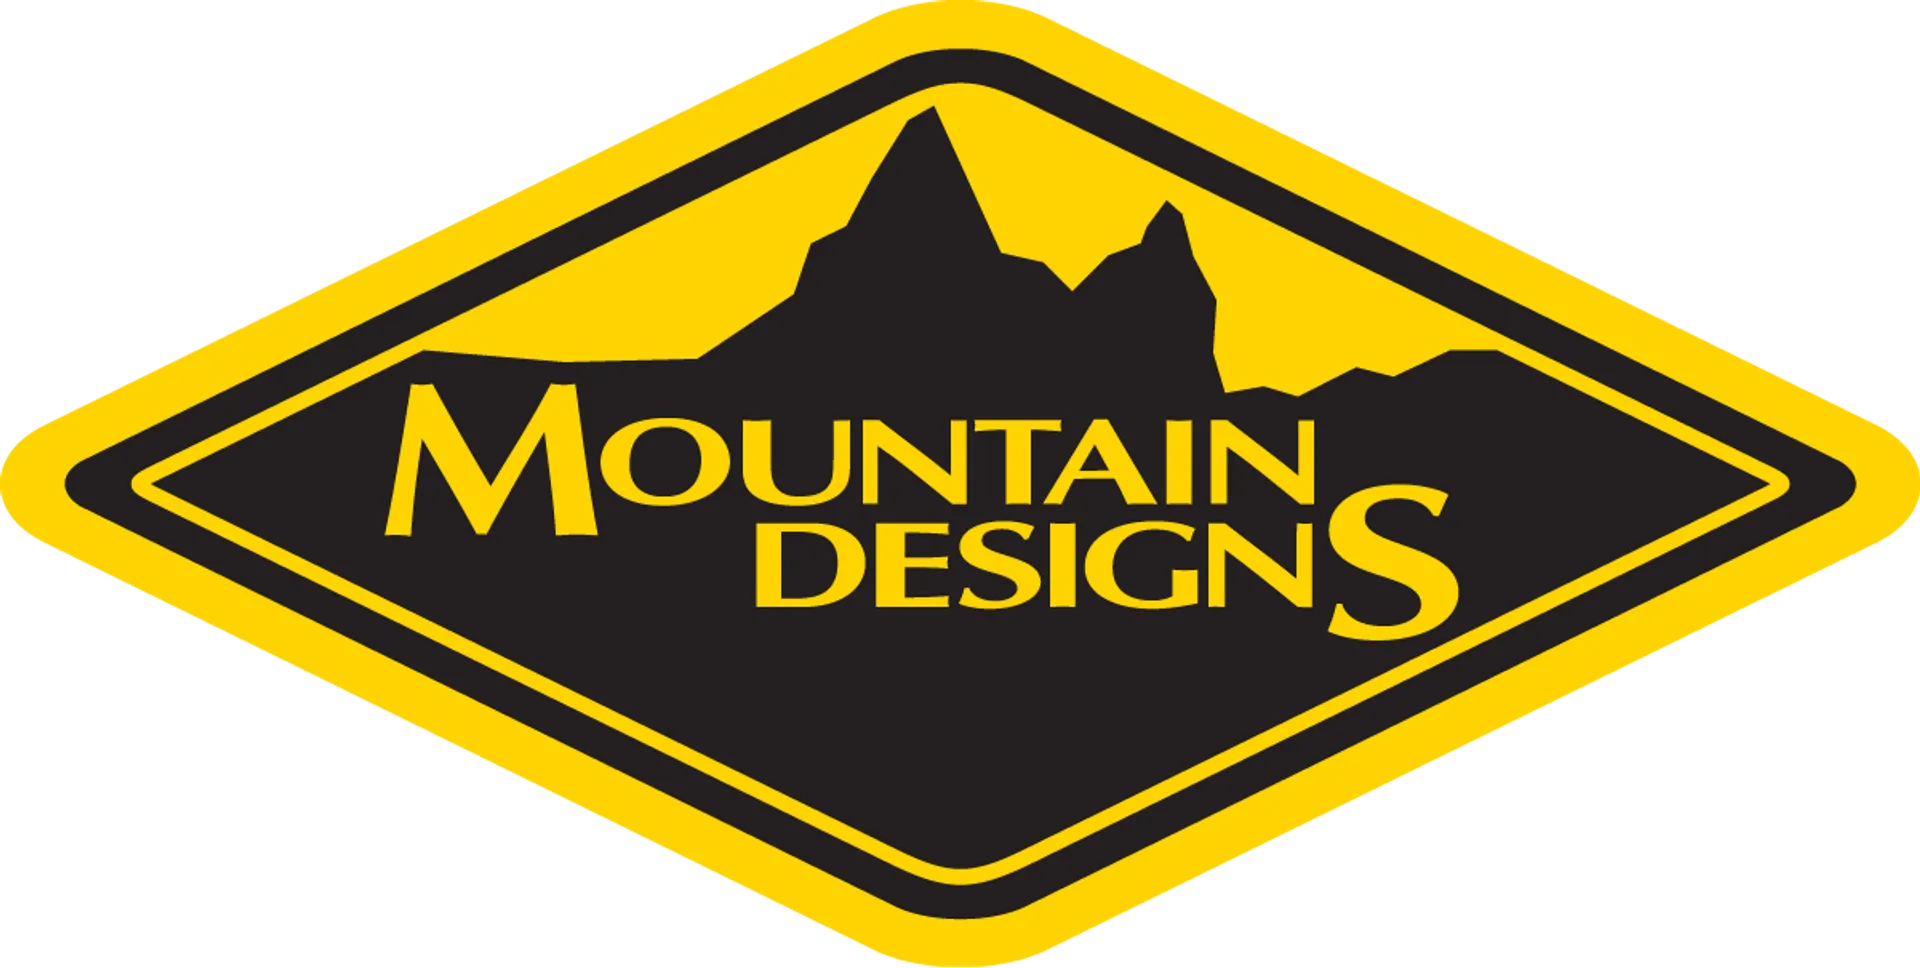 MOUNTAIN DESIGNS logo of current catalogue